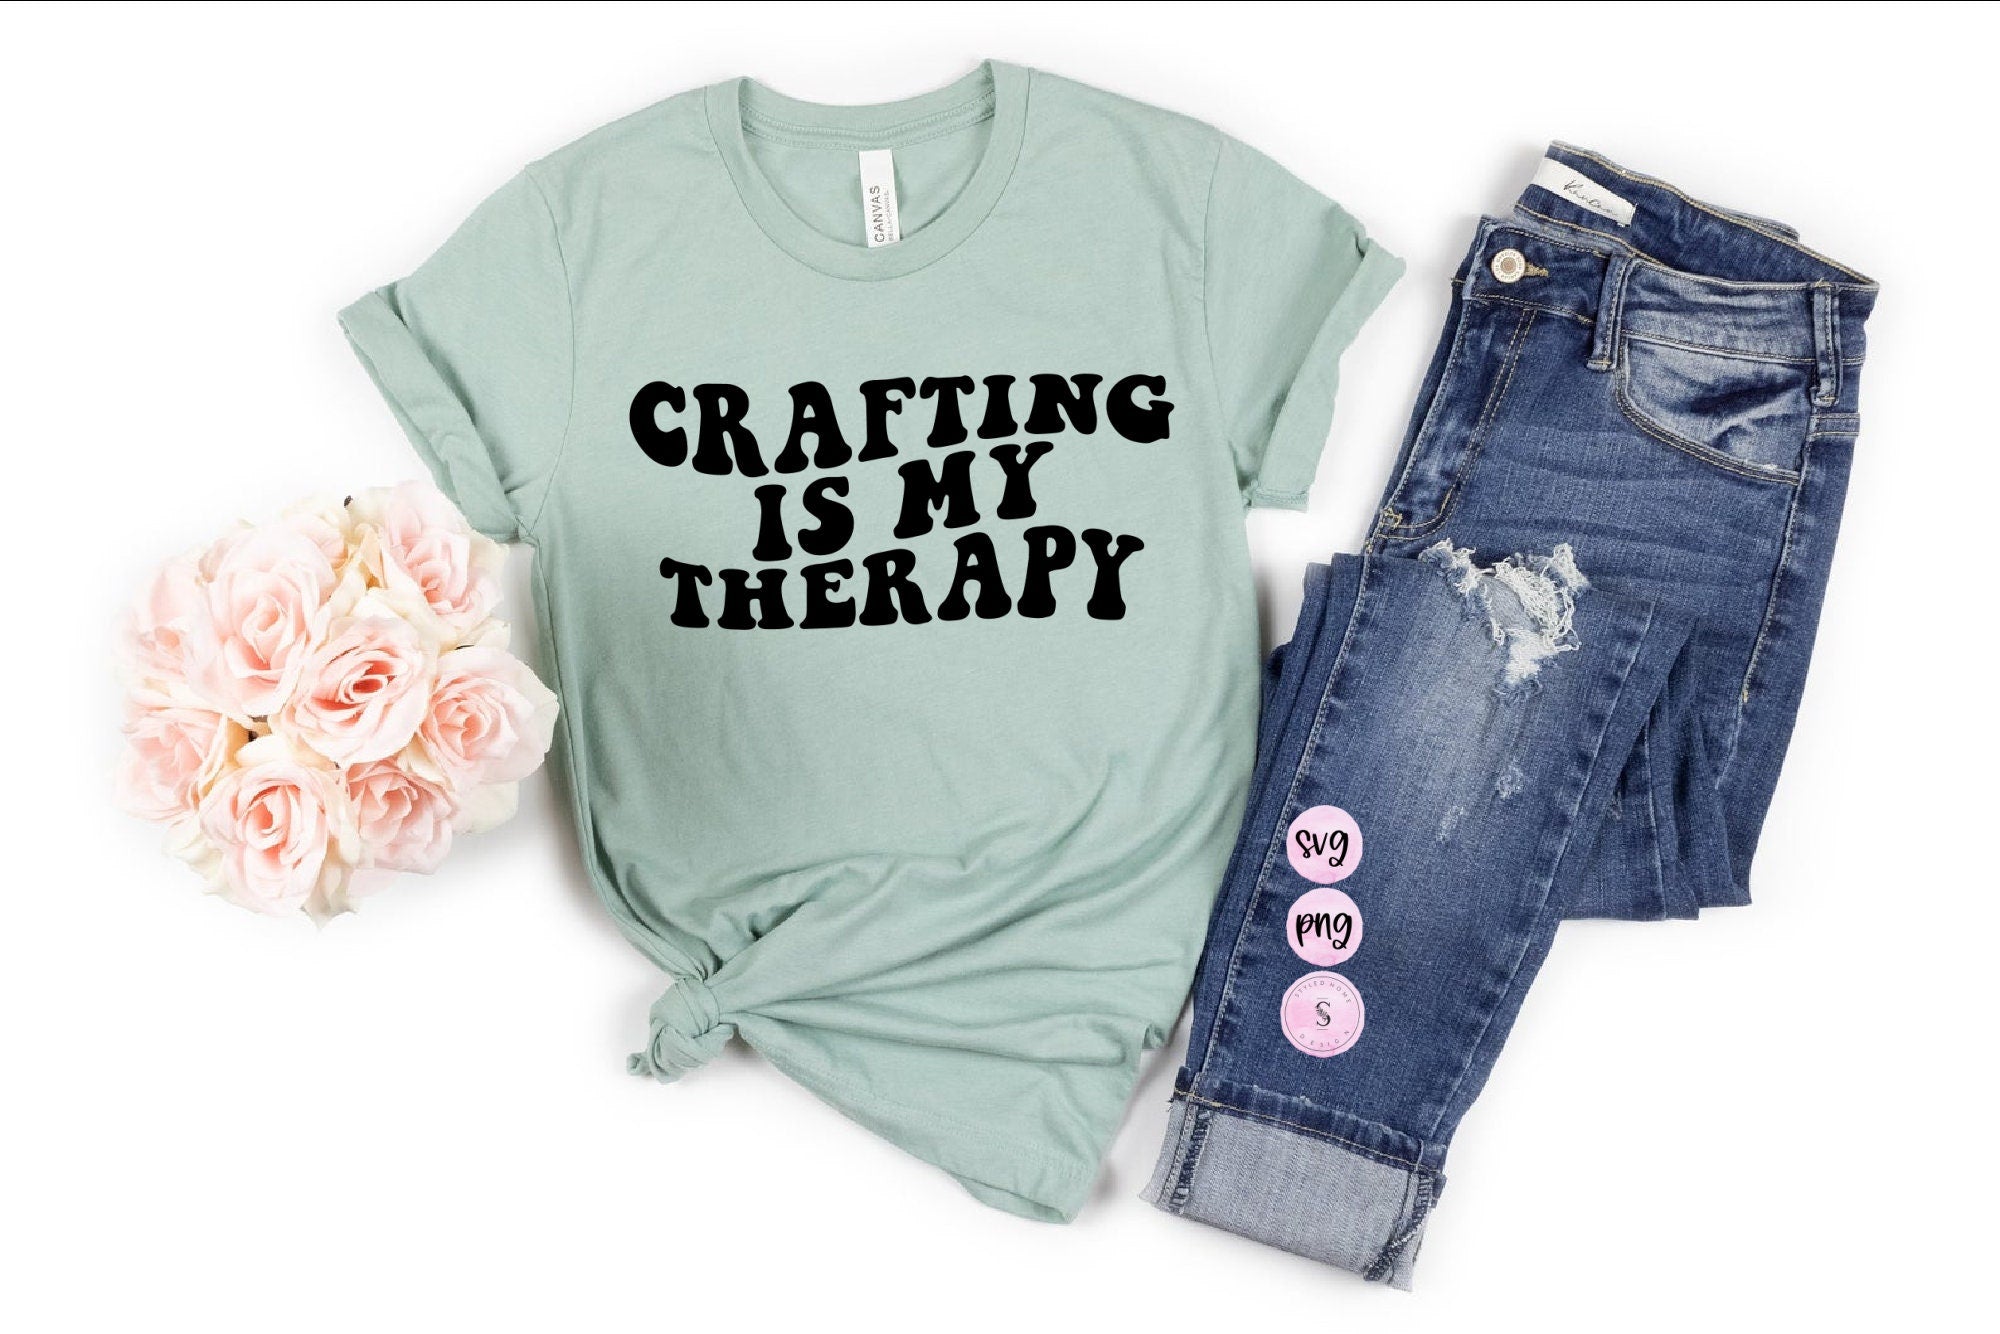 Crafting is my Therapy, Crafter Shirt, Crafter Mug, Crafting, Small business Owner Retro Boho SVG Cut File Printable PNG Cricut Sublimation